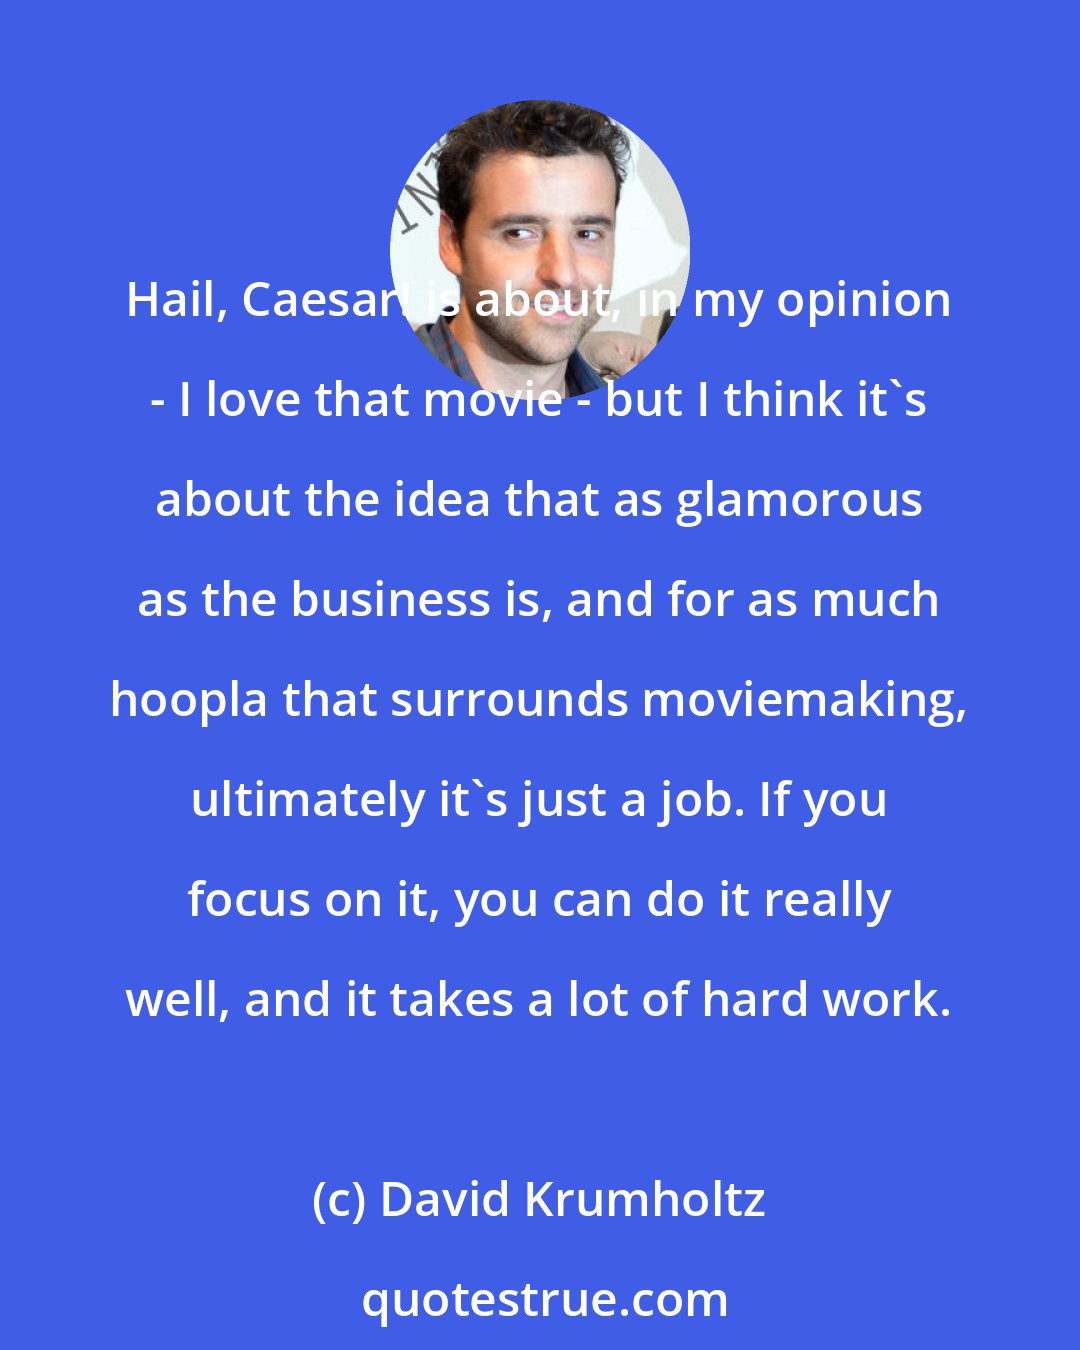 David Krumholtz: Hail, Caesar! is about, in my opinion - I love that movie - but I think it's about the idea that as glamorous as the business is, and for as much hoopla that surrounds moviemaking, ultimately it's just a job. If you focus on it, you can do it really well, and it takes a lot of hard work.